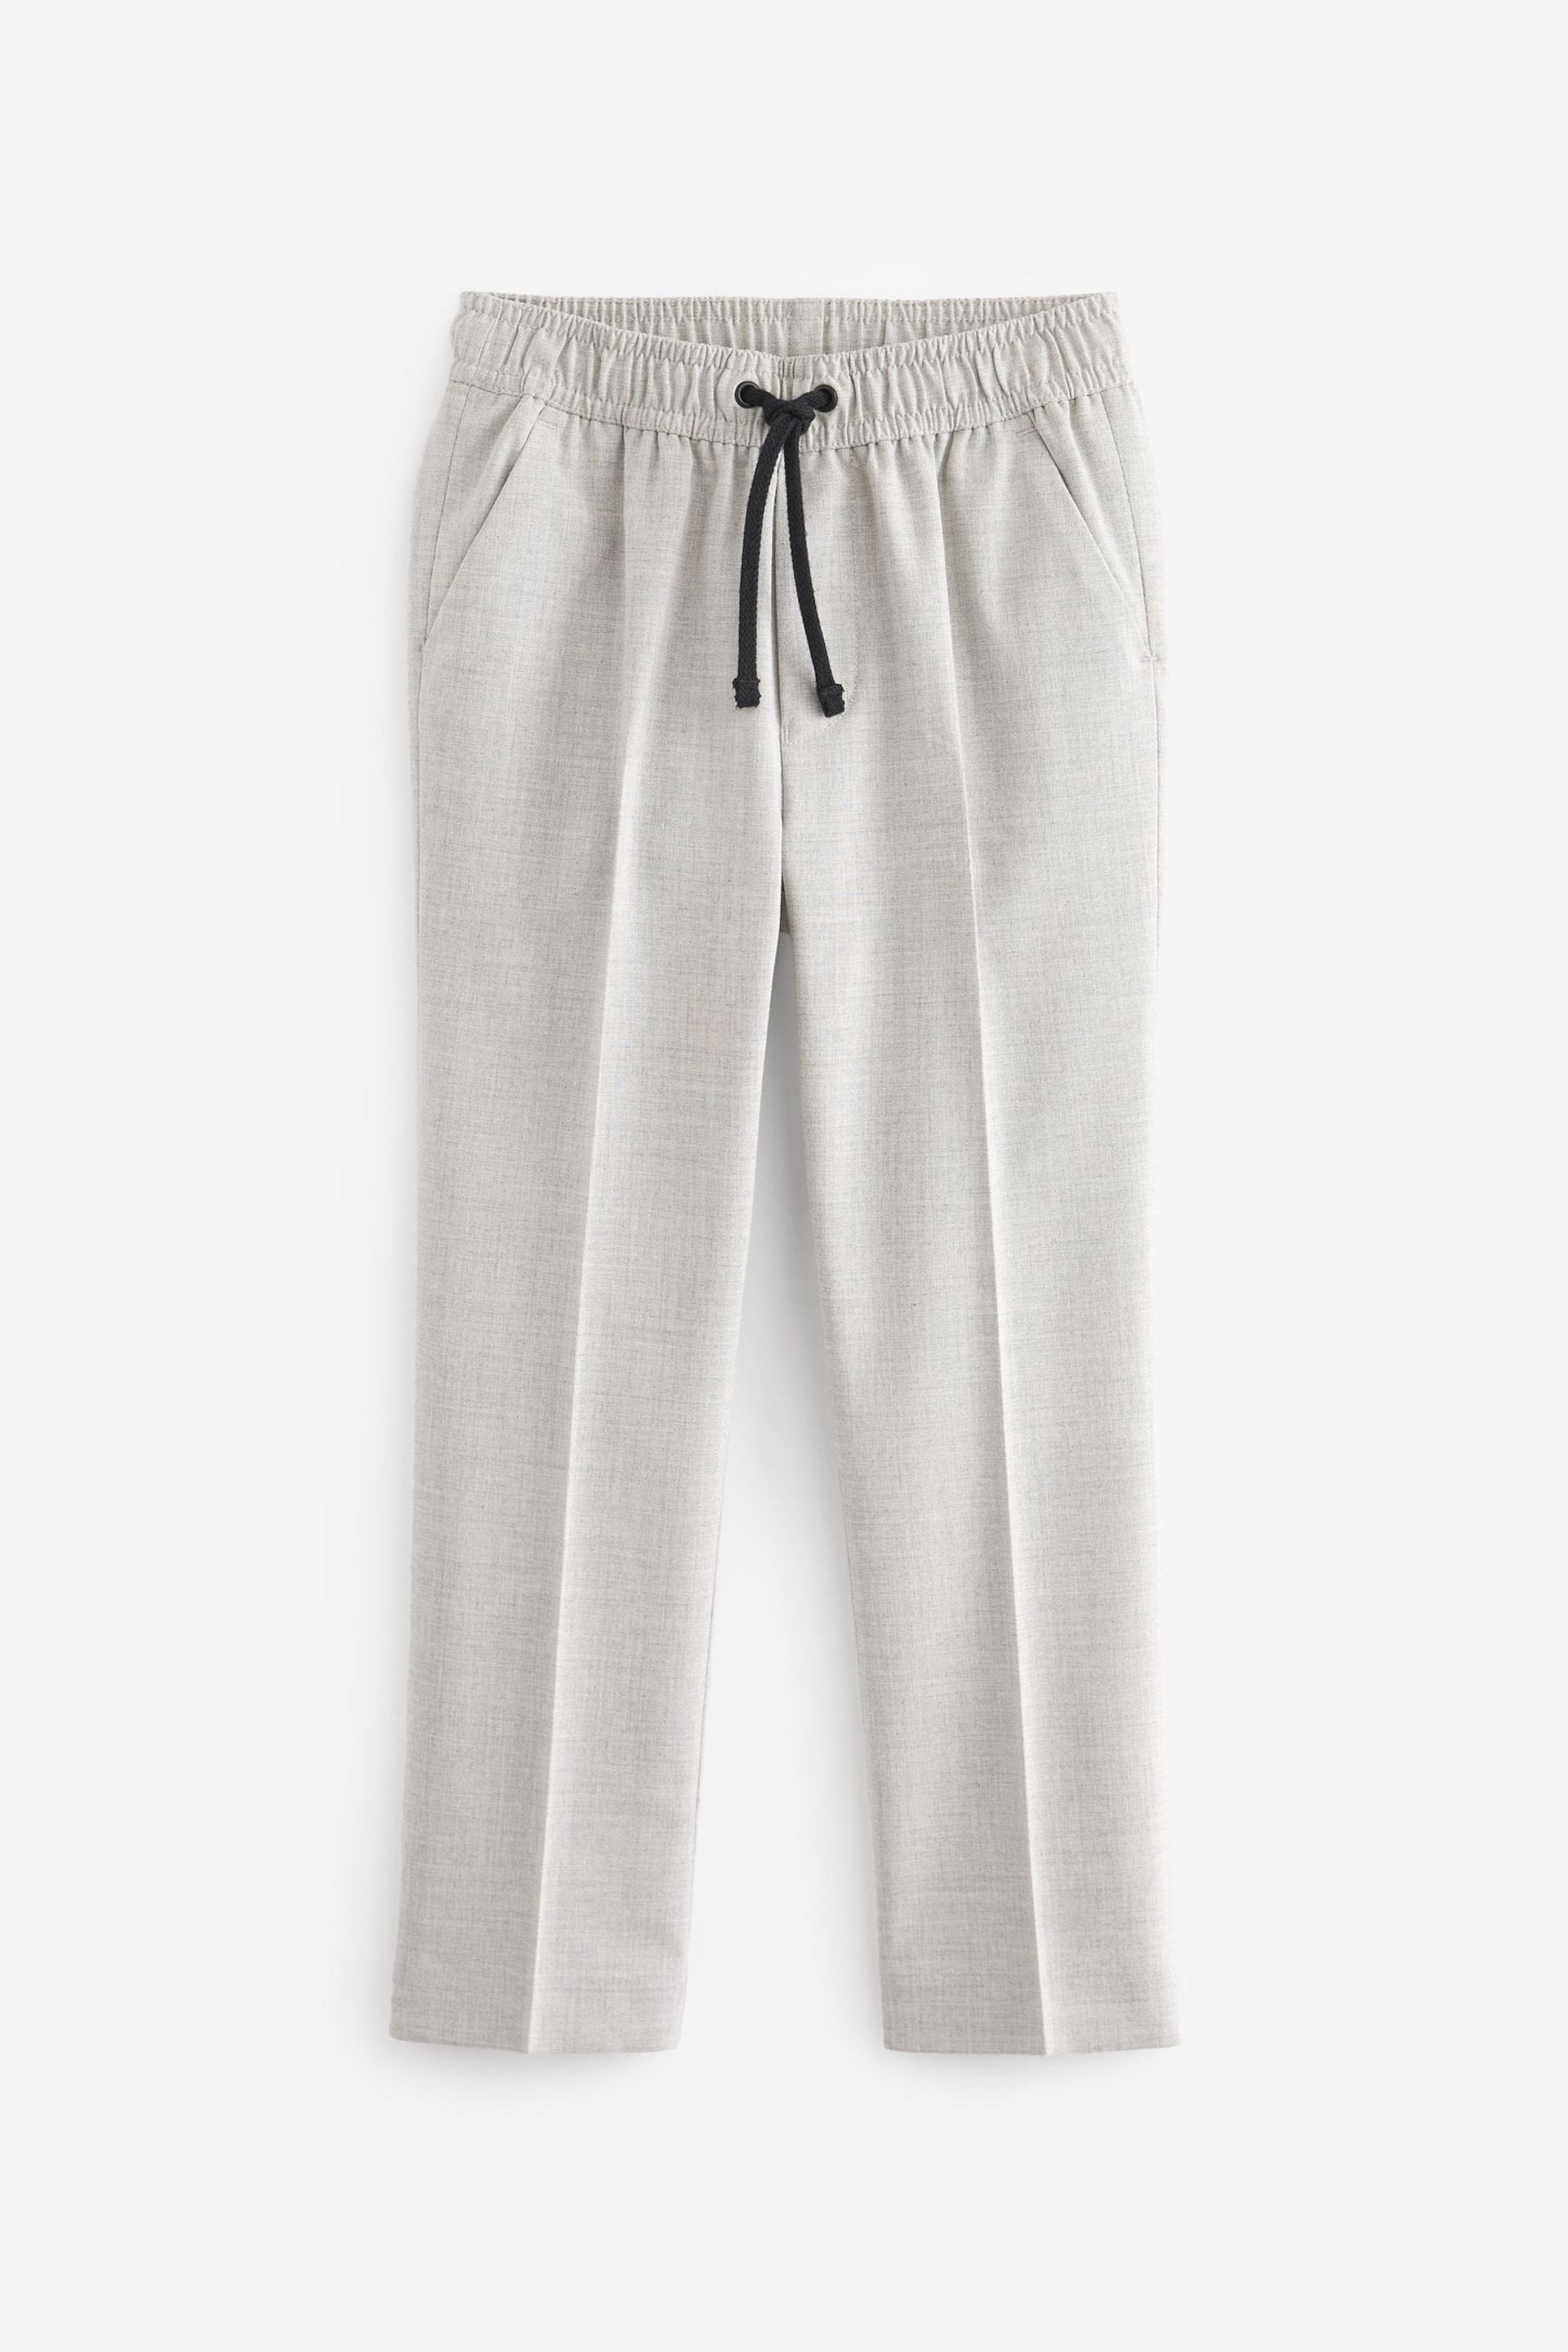 Grey Pull On Waist Suit: Trousers (12mths-16yrs) - Image 1 of 4